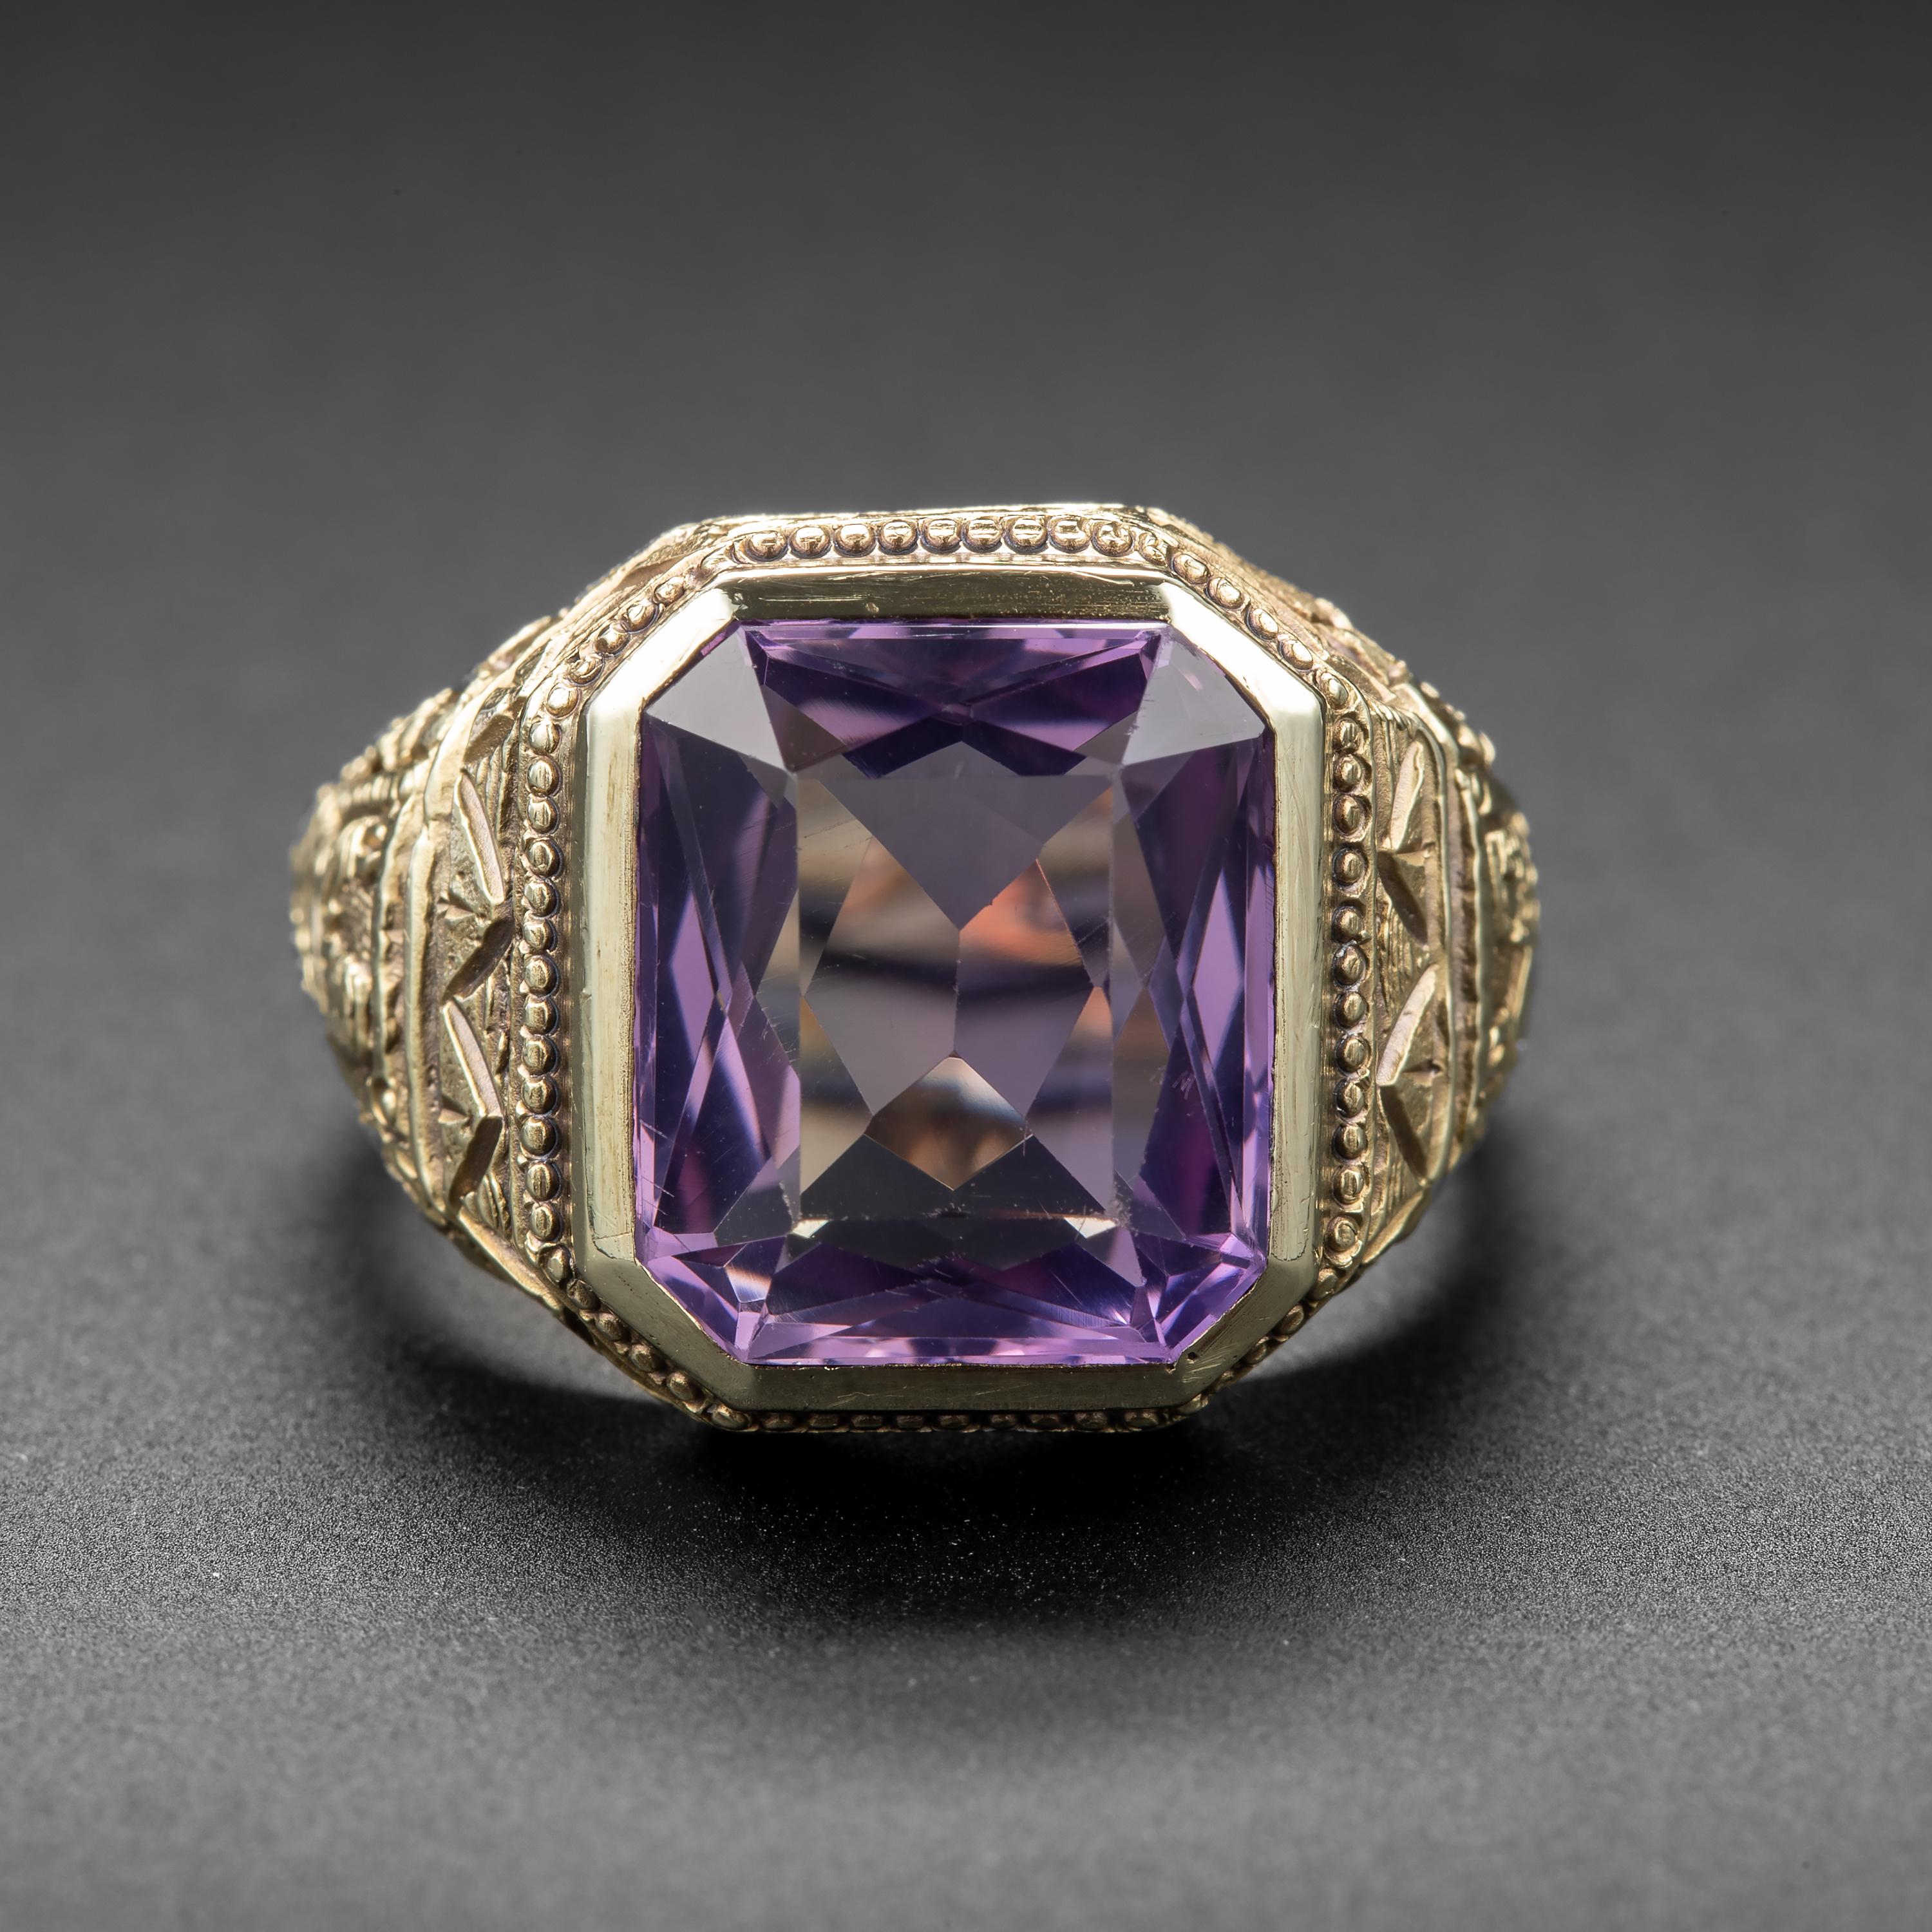 A bold and beautiful Egyptian Revival statement ring from the Art Deco era. Crafted by hand in 14k yellow gold, the ring showcases a beautiful rectangular-cut amethyst that measures approximately 14.40mm x 11.84mm and weighs about 8.79 carats. The